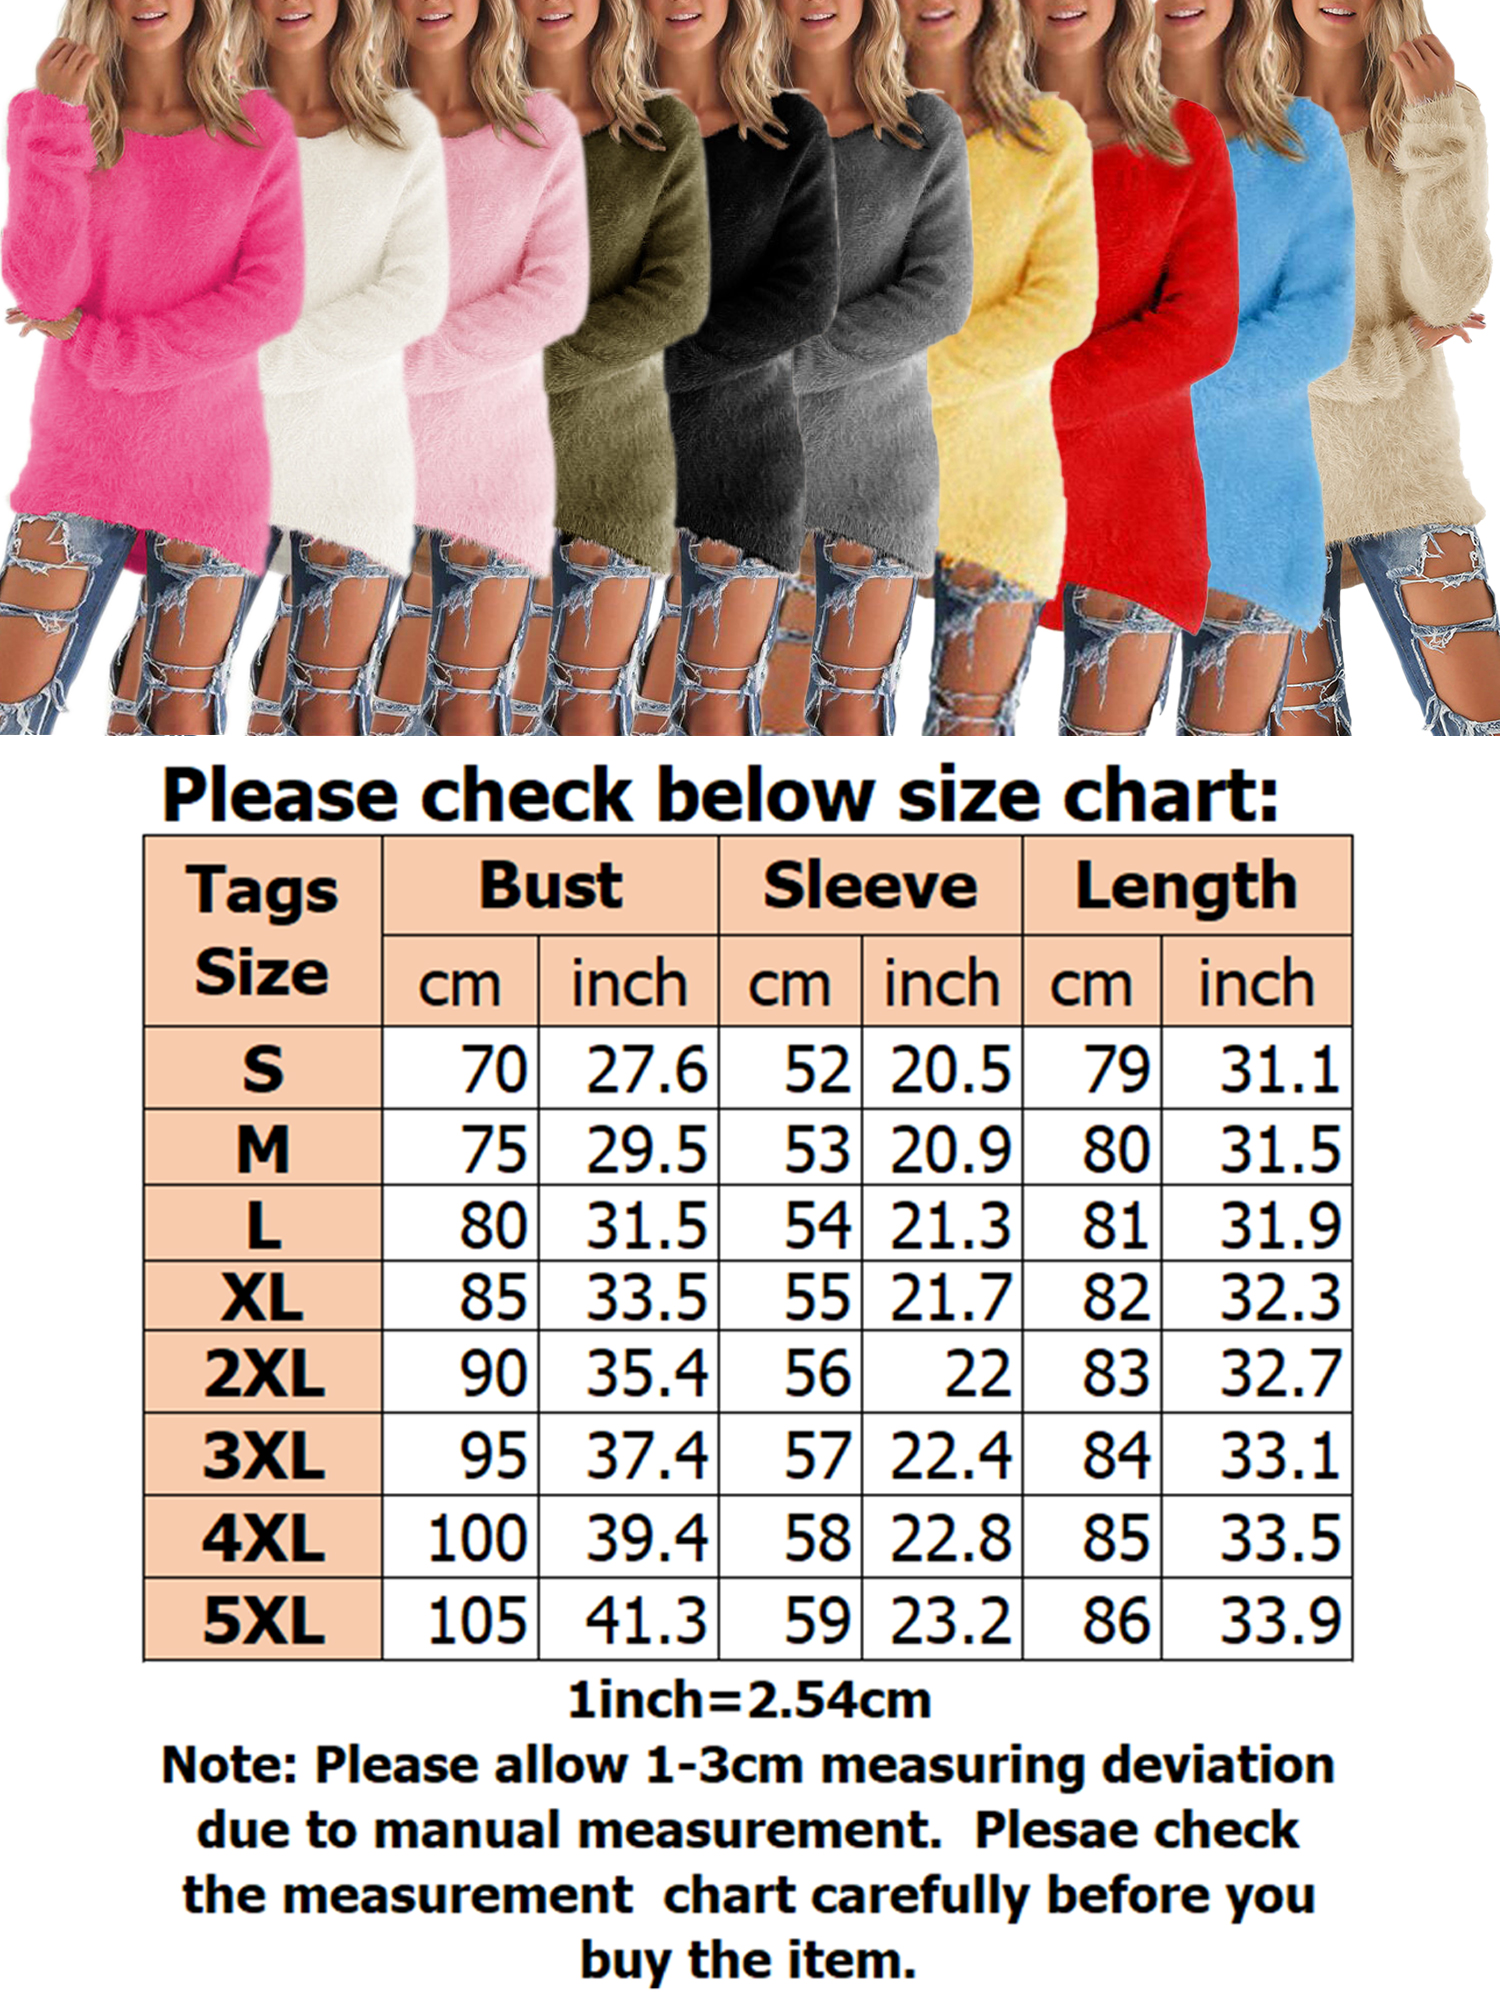 Plus Size Women Mid-Length Loose Solid Color Pullover Sweaters High Low Fluffy Tunics Crew Neck Womens Knit Tops for Junior Ladies Women - image 2 of 3